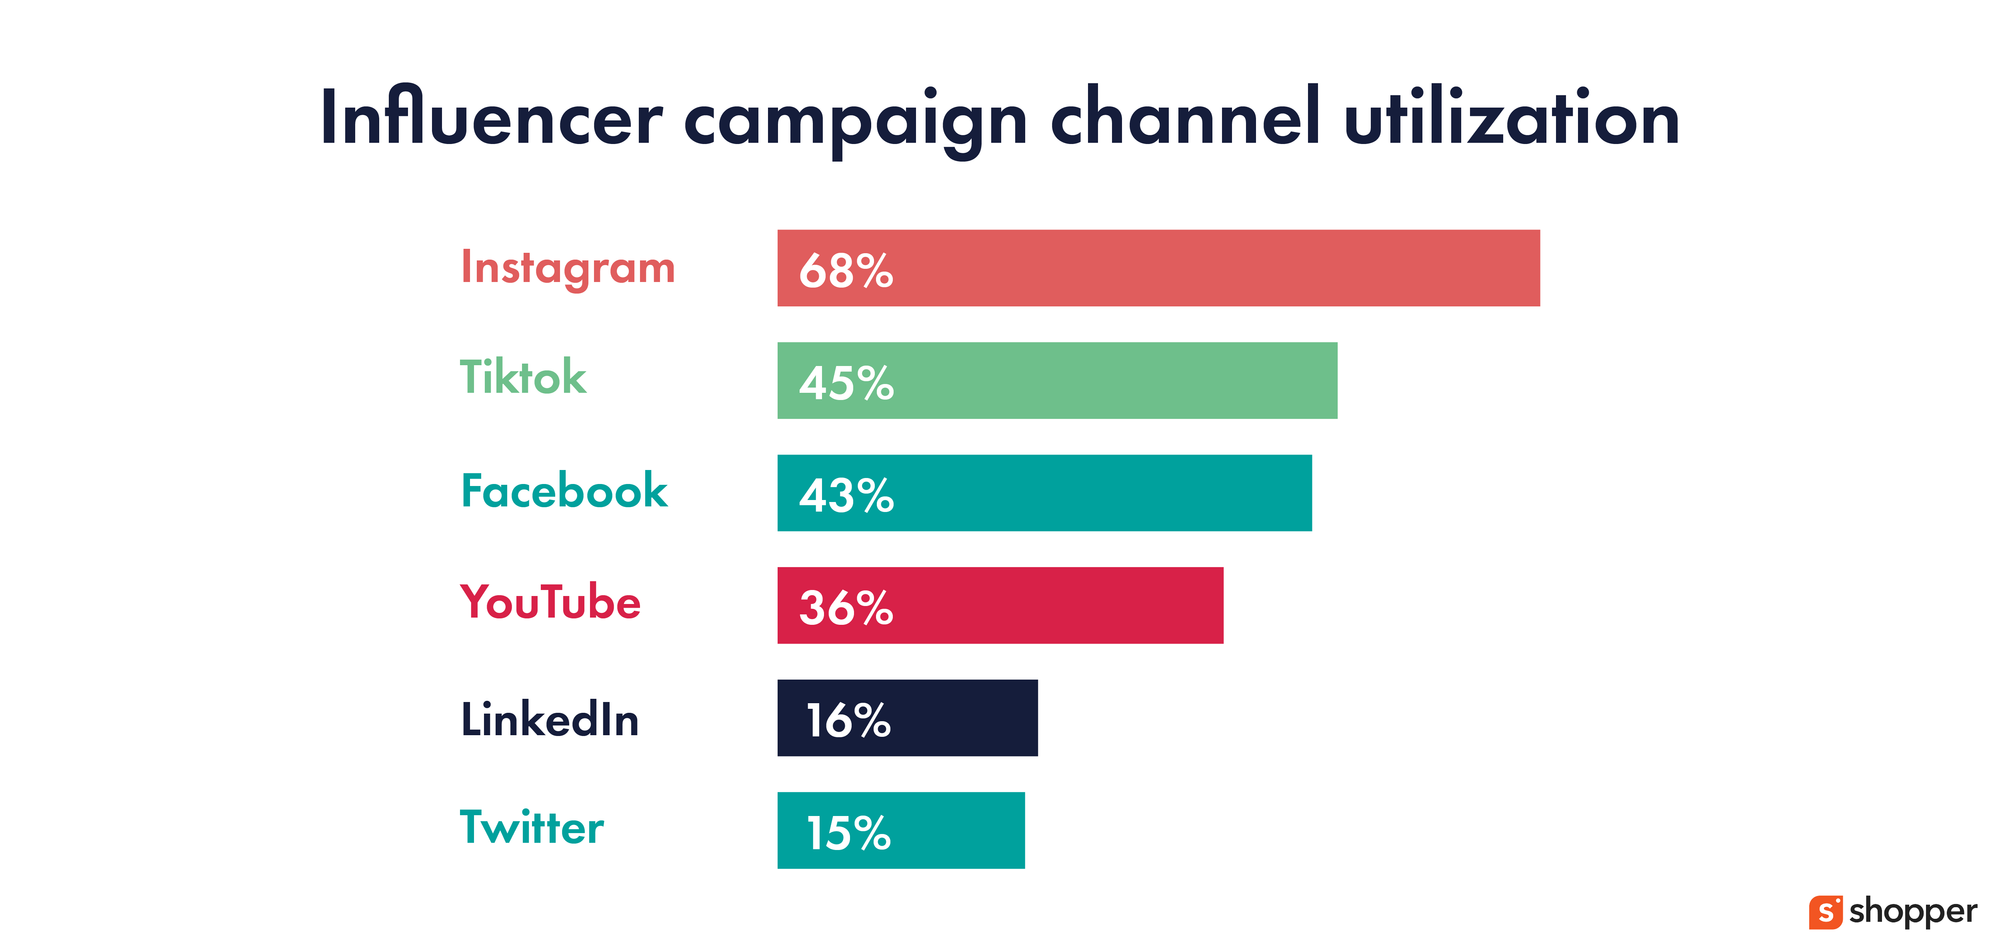 Brand Influencer Partnerships Increased in Most of the Social Media Platforms